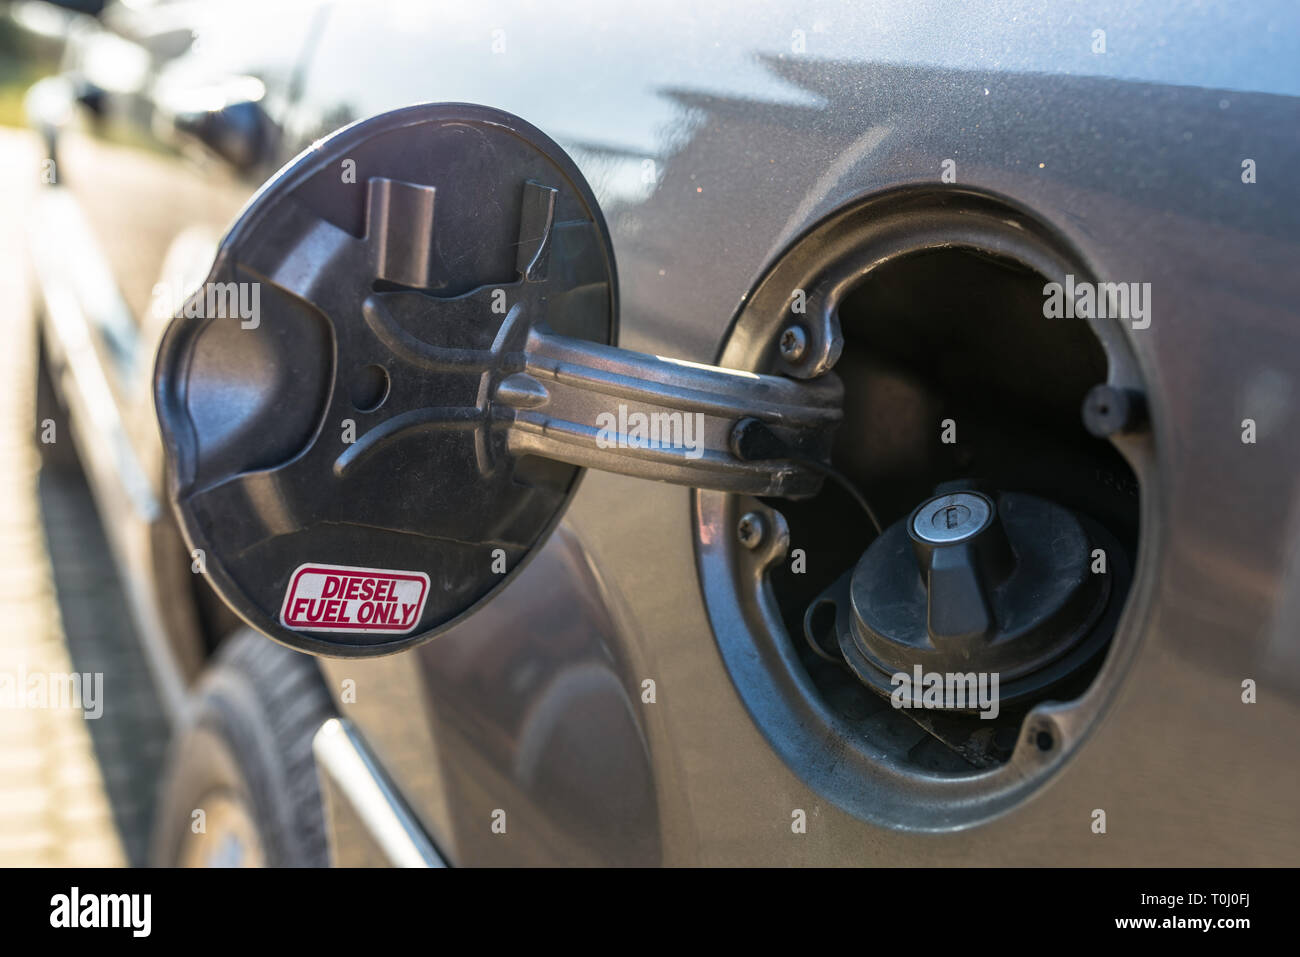 Open fuel filler flap with the word DIESEL FUEL ONLY, the petrol cap is closed. Stock Photo